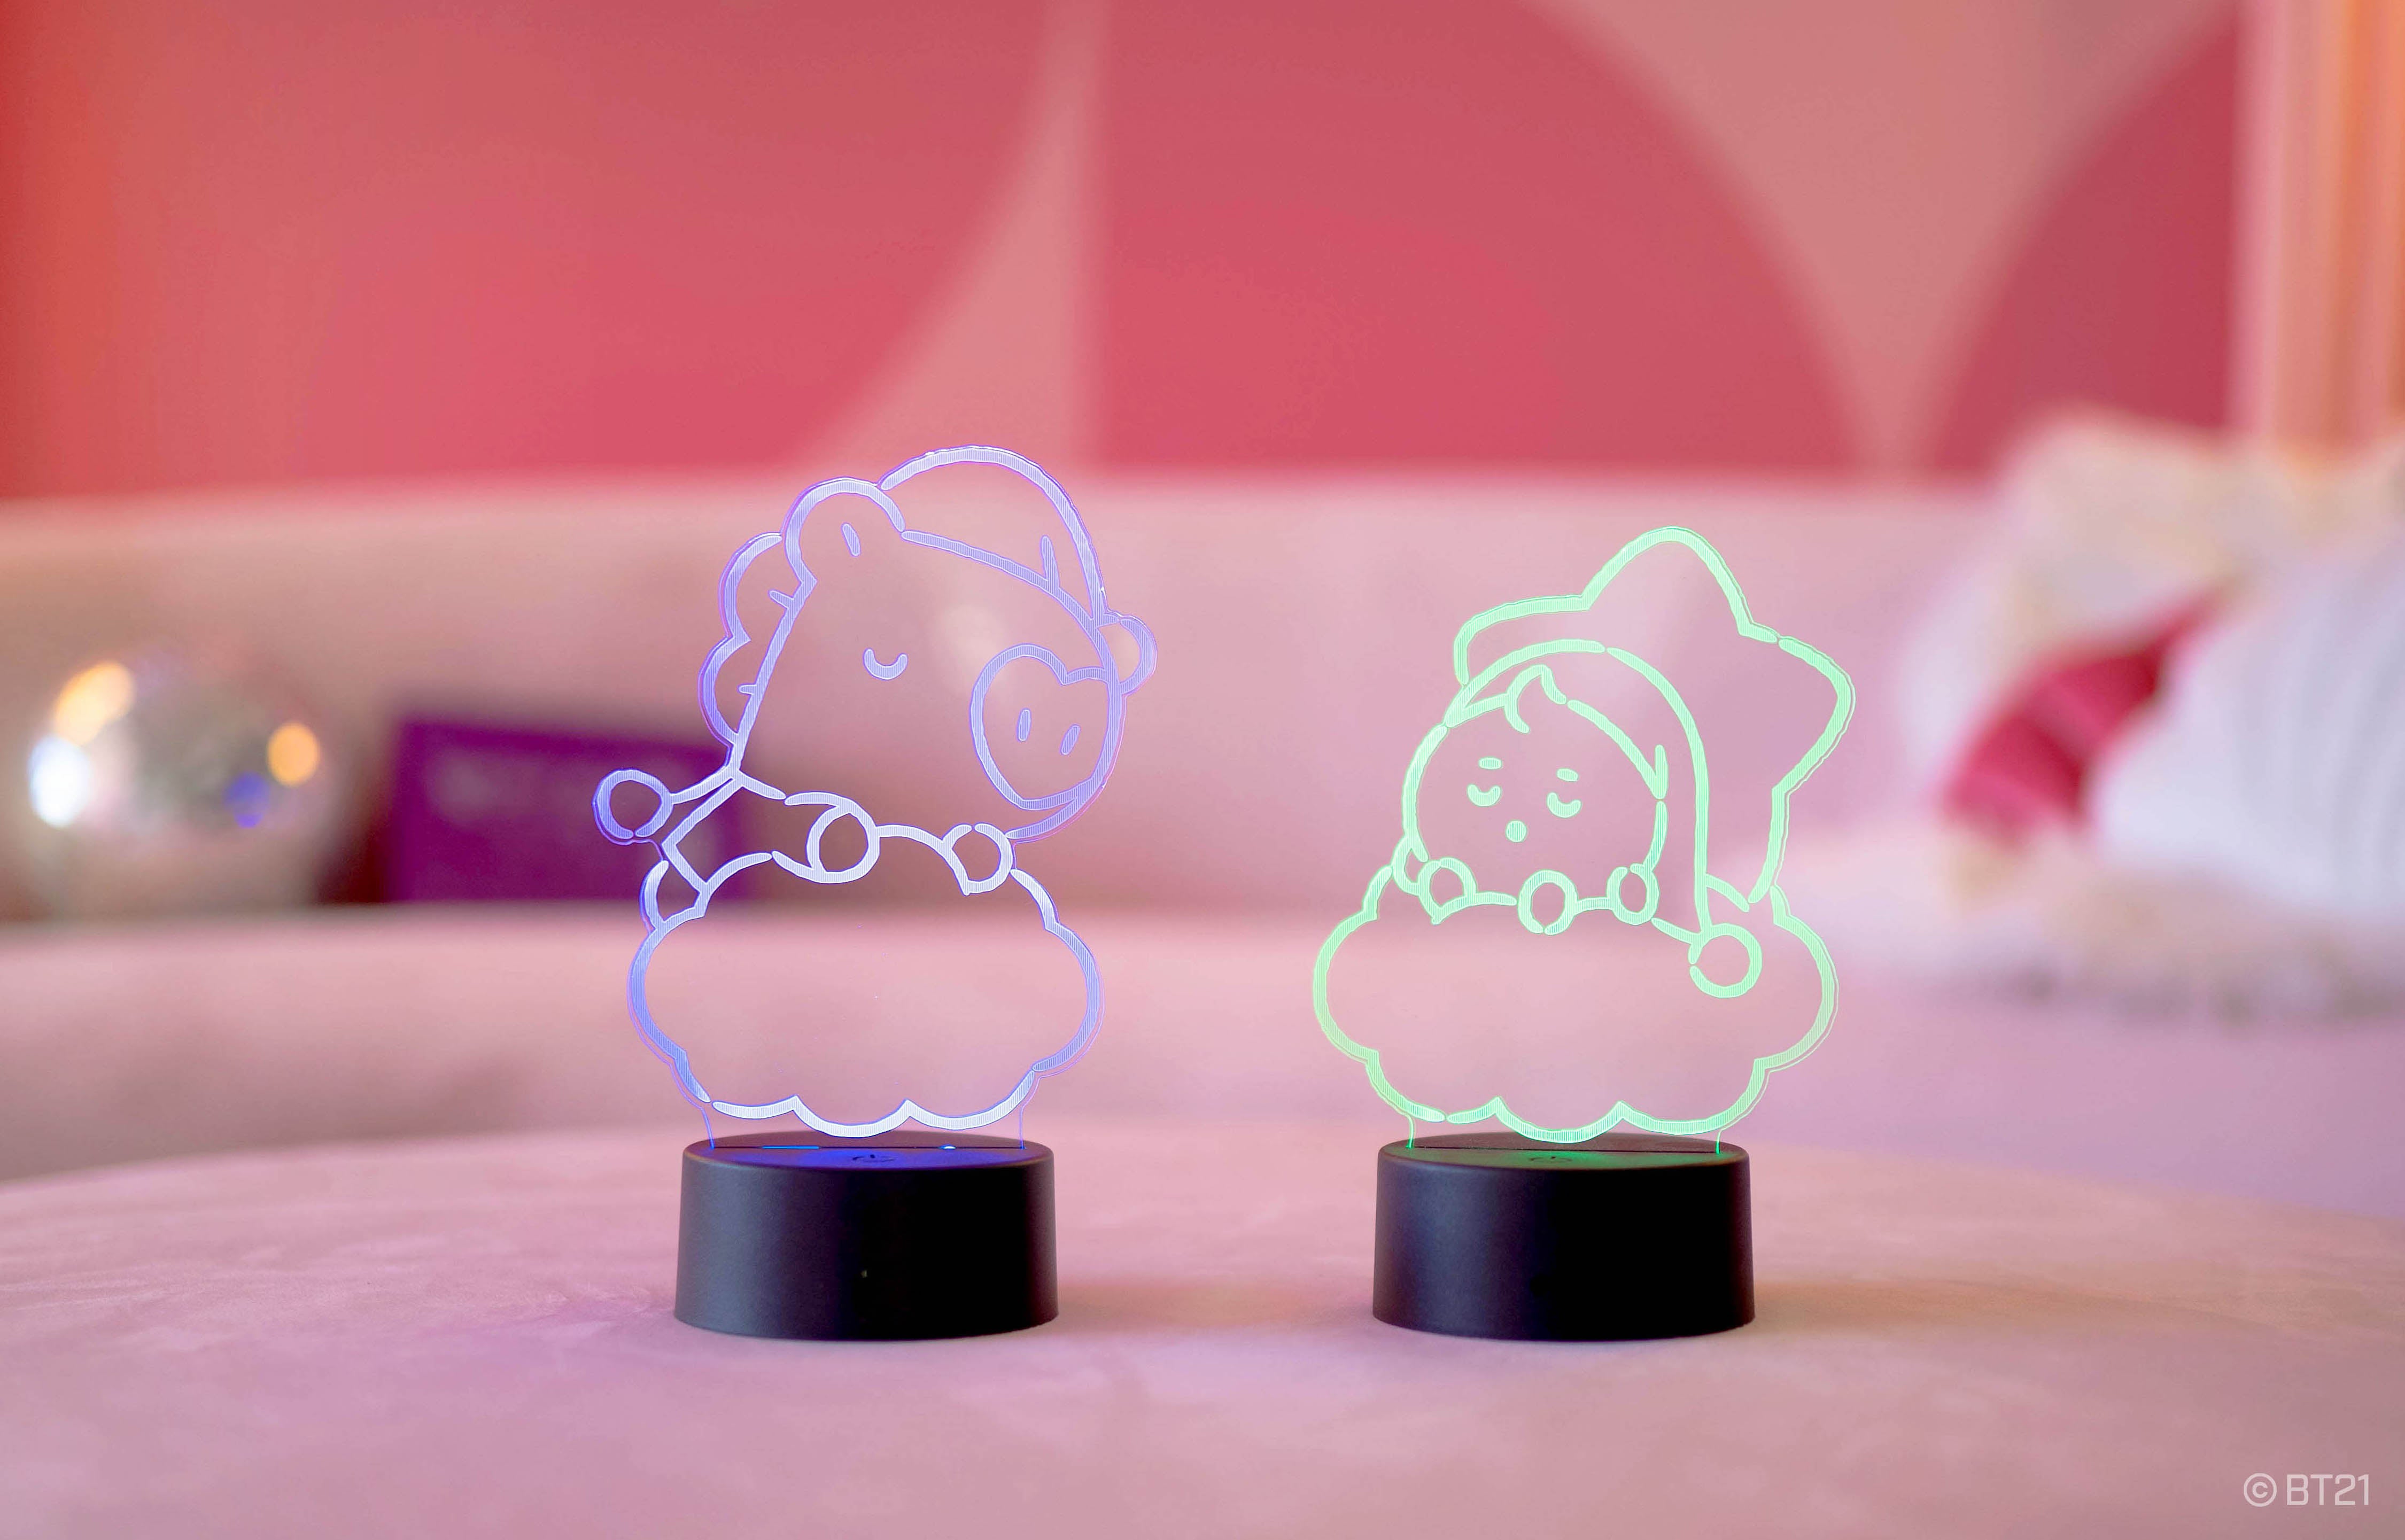 COOKY BABY LED LAMP (BT21)